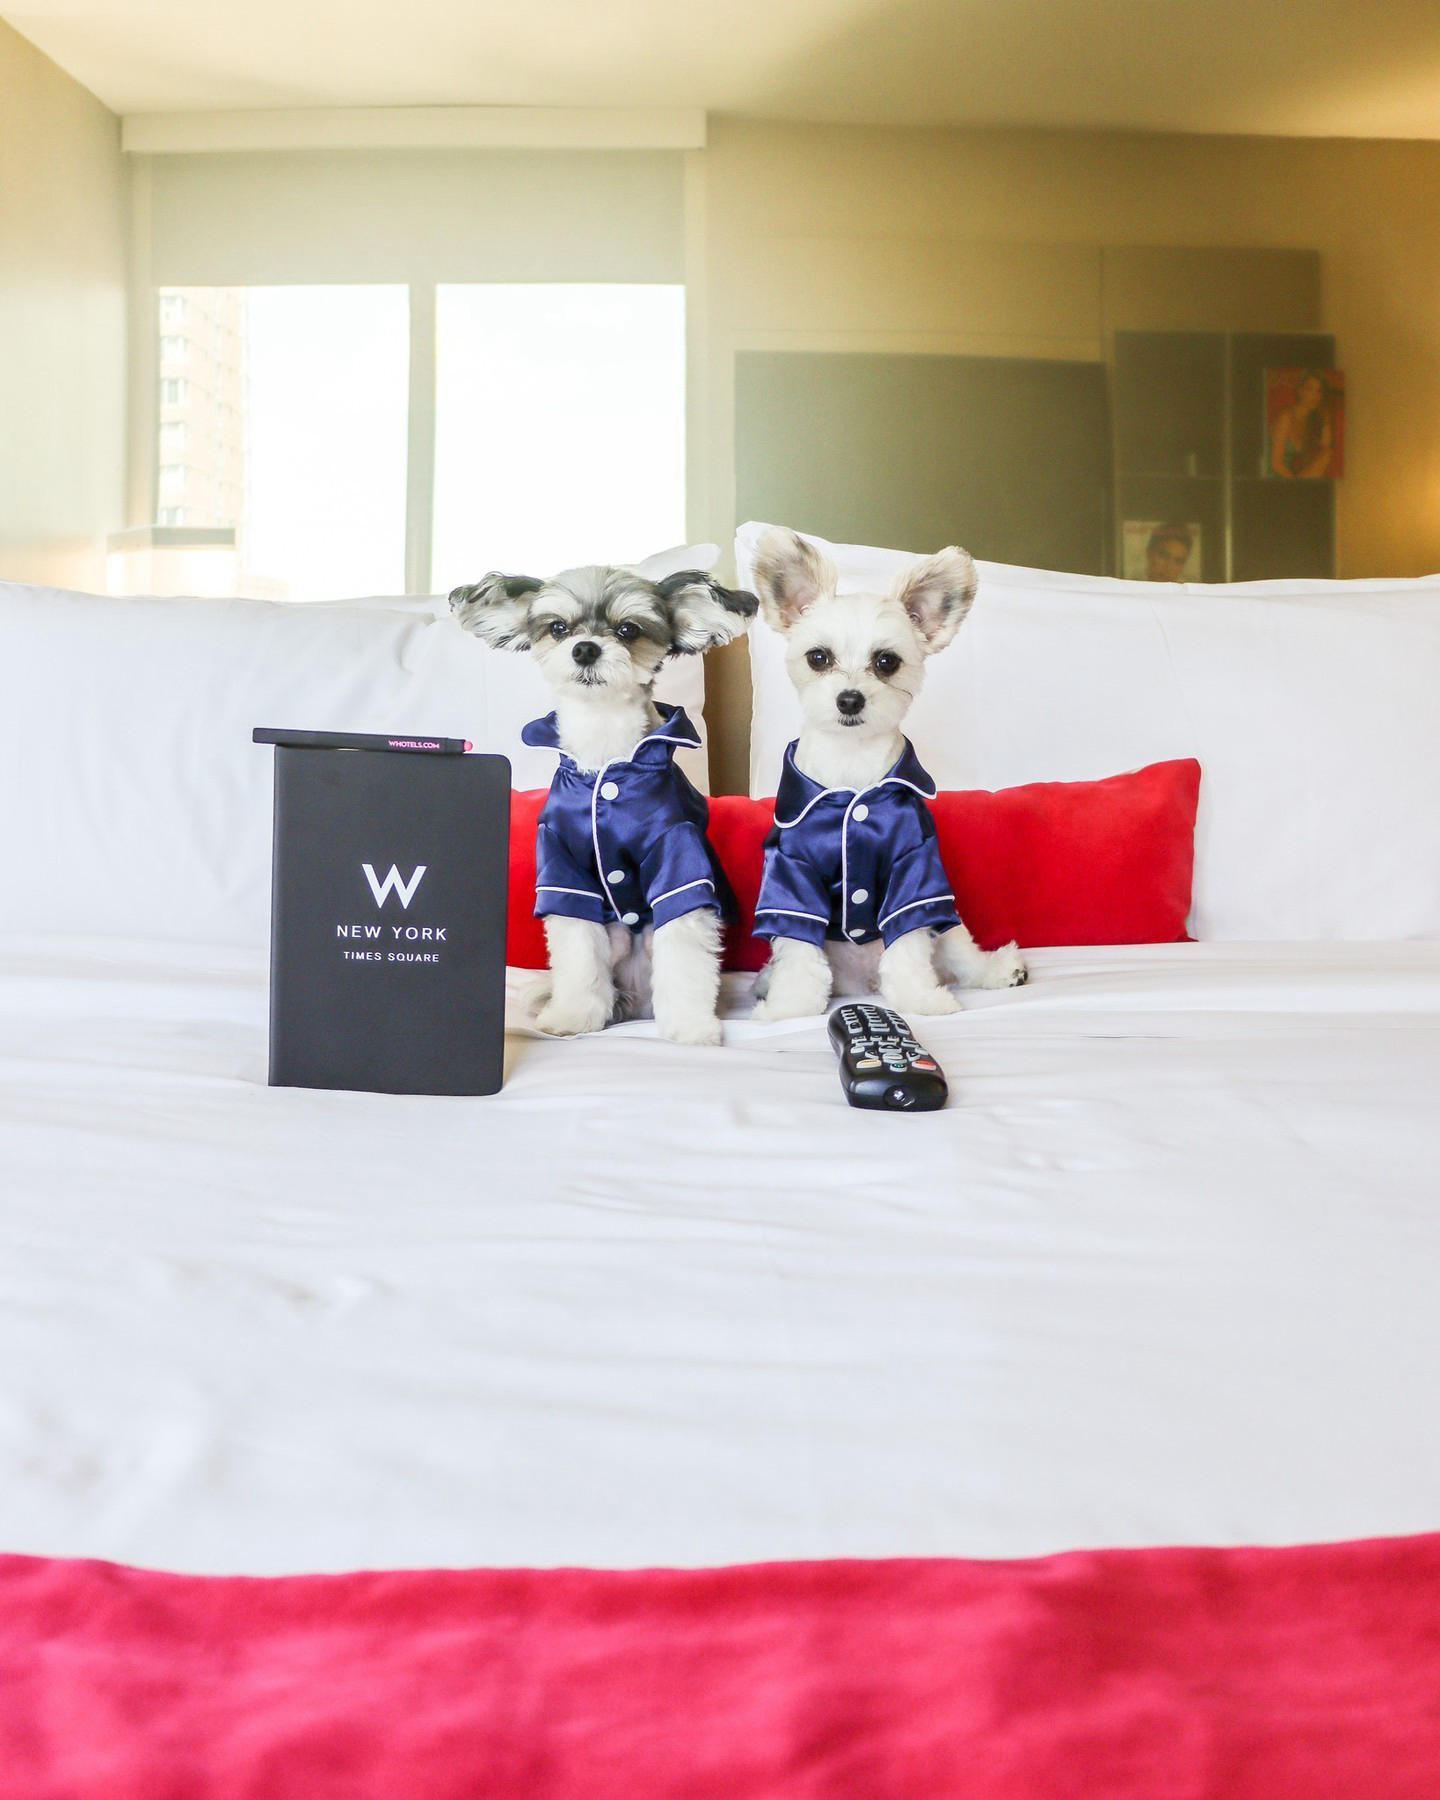 Your pets will thank you for including them on your next trip, especially when we spoil them with cu